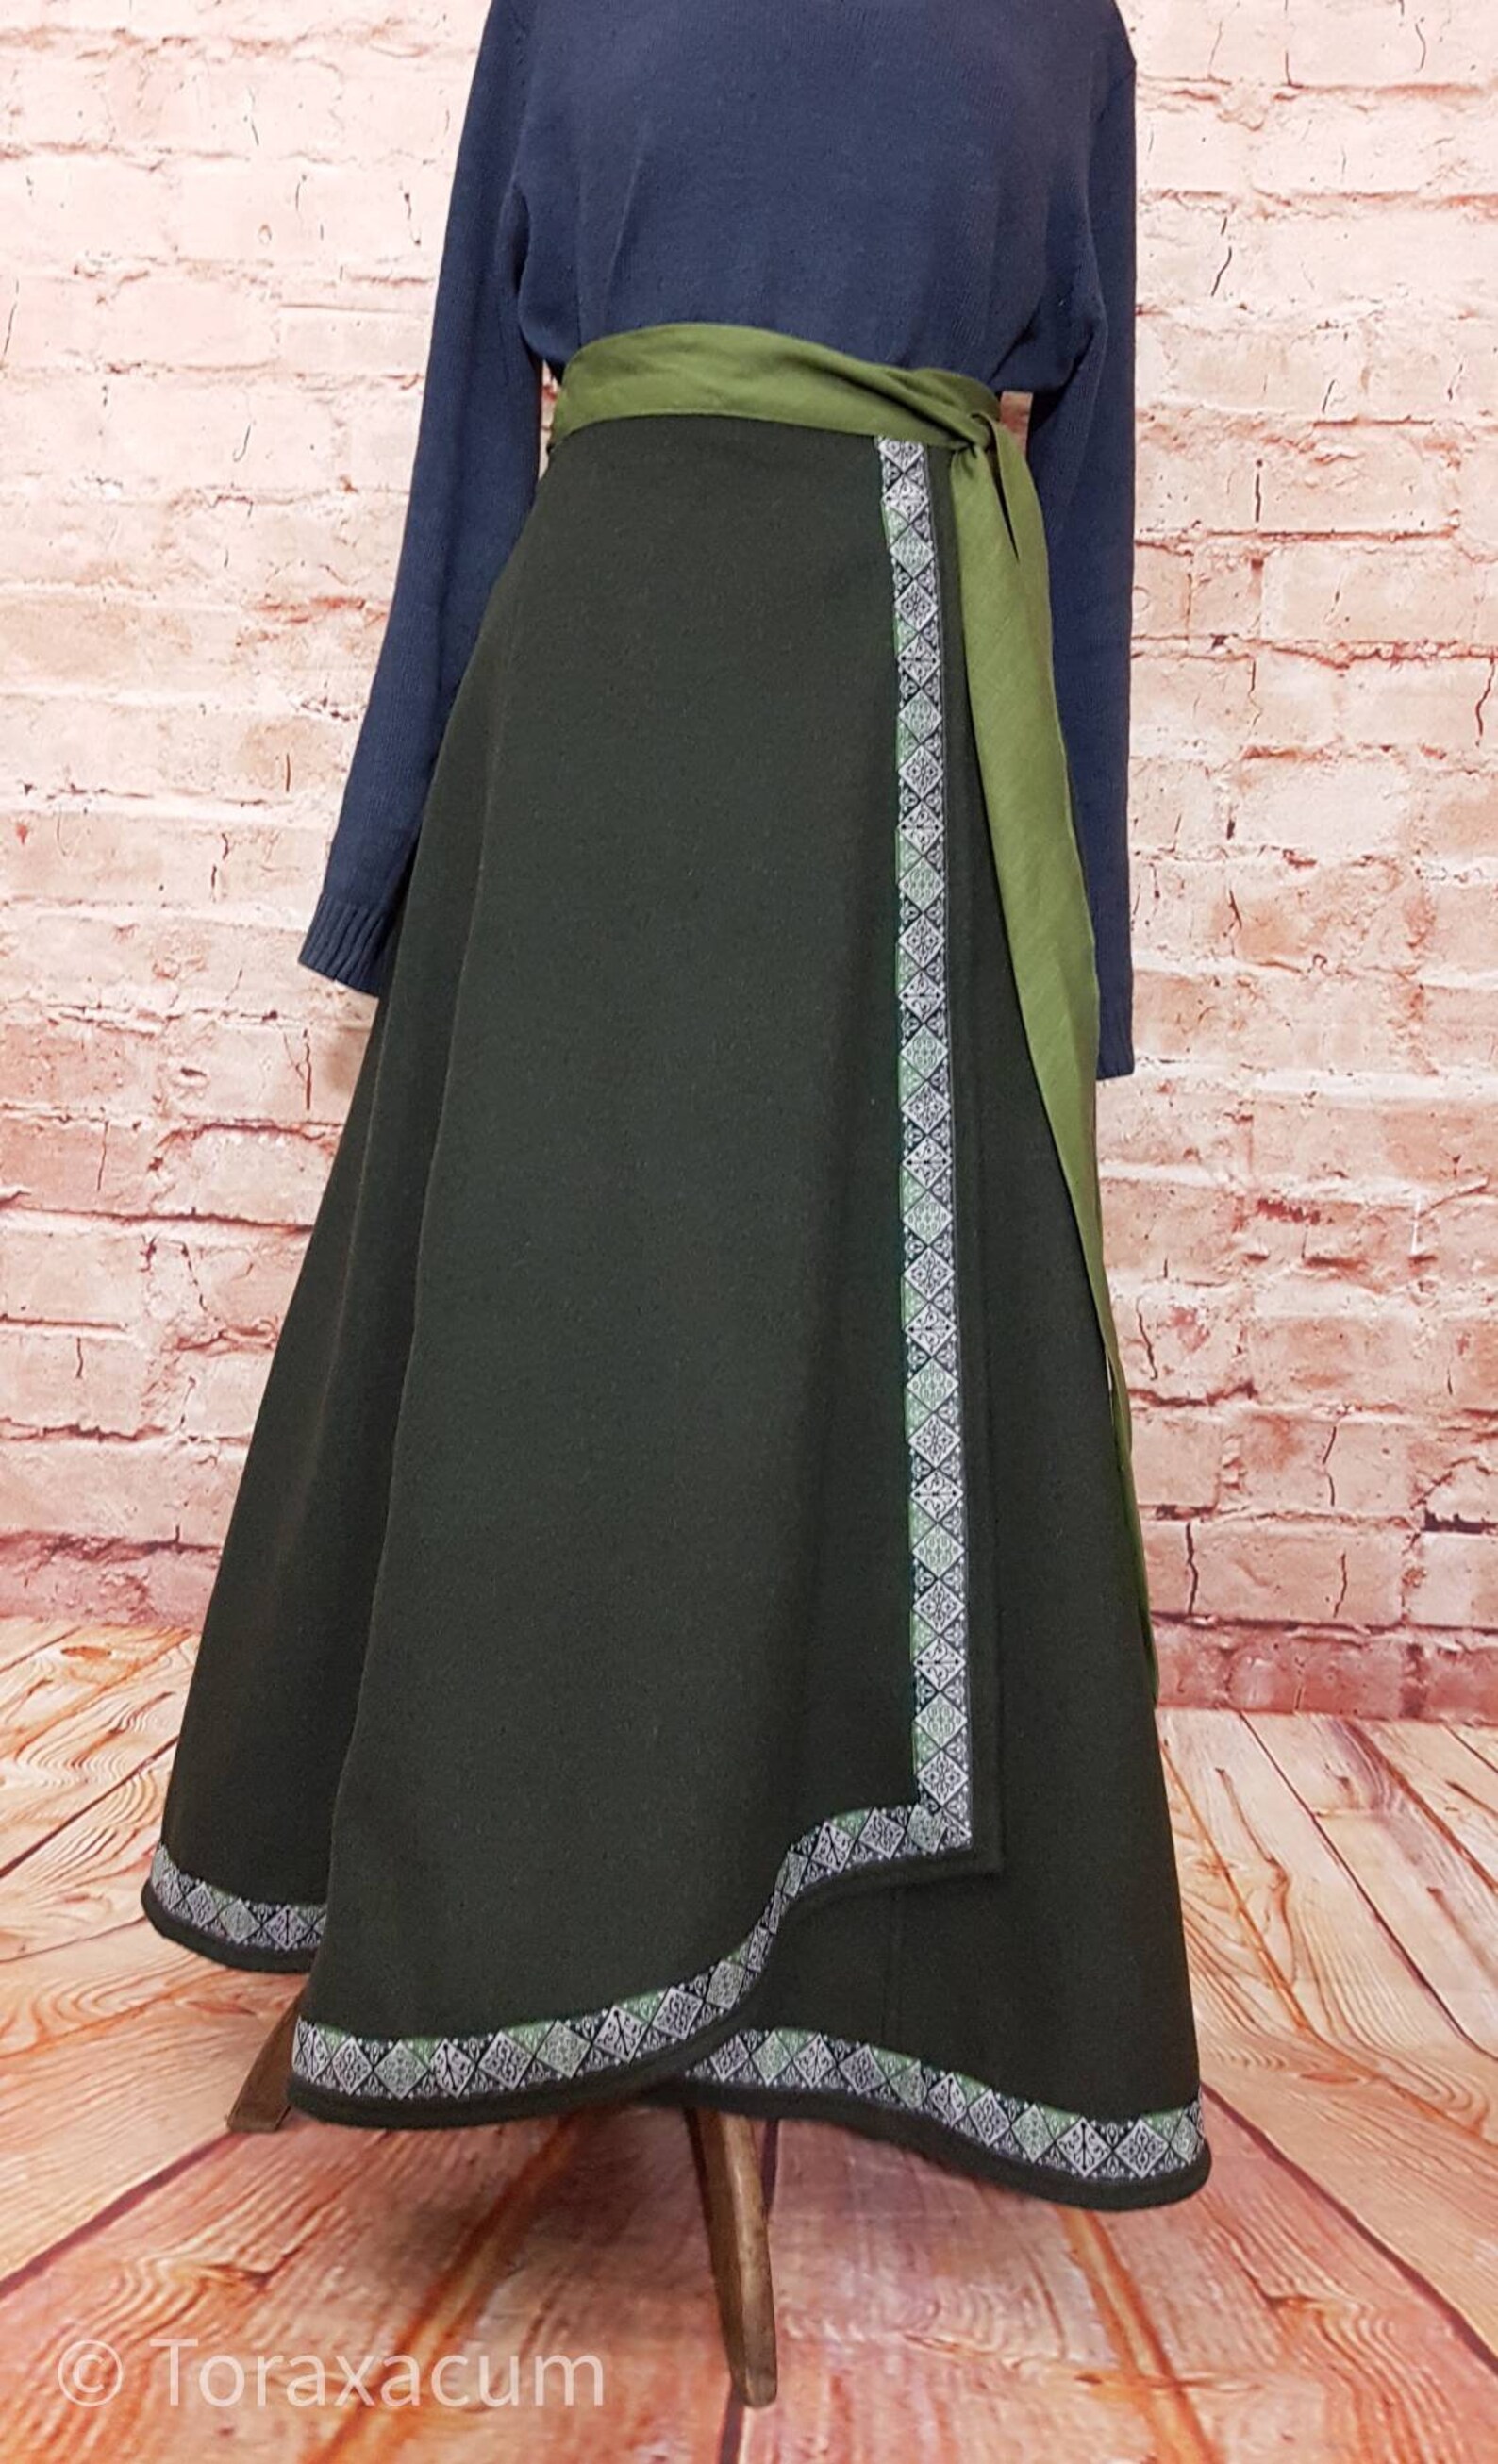 Riding Skirt Wool Olive With Border Wrap Skirt XS-XL Long | Etsy